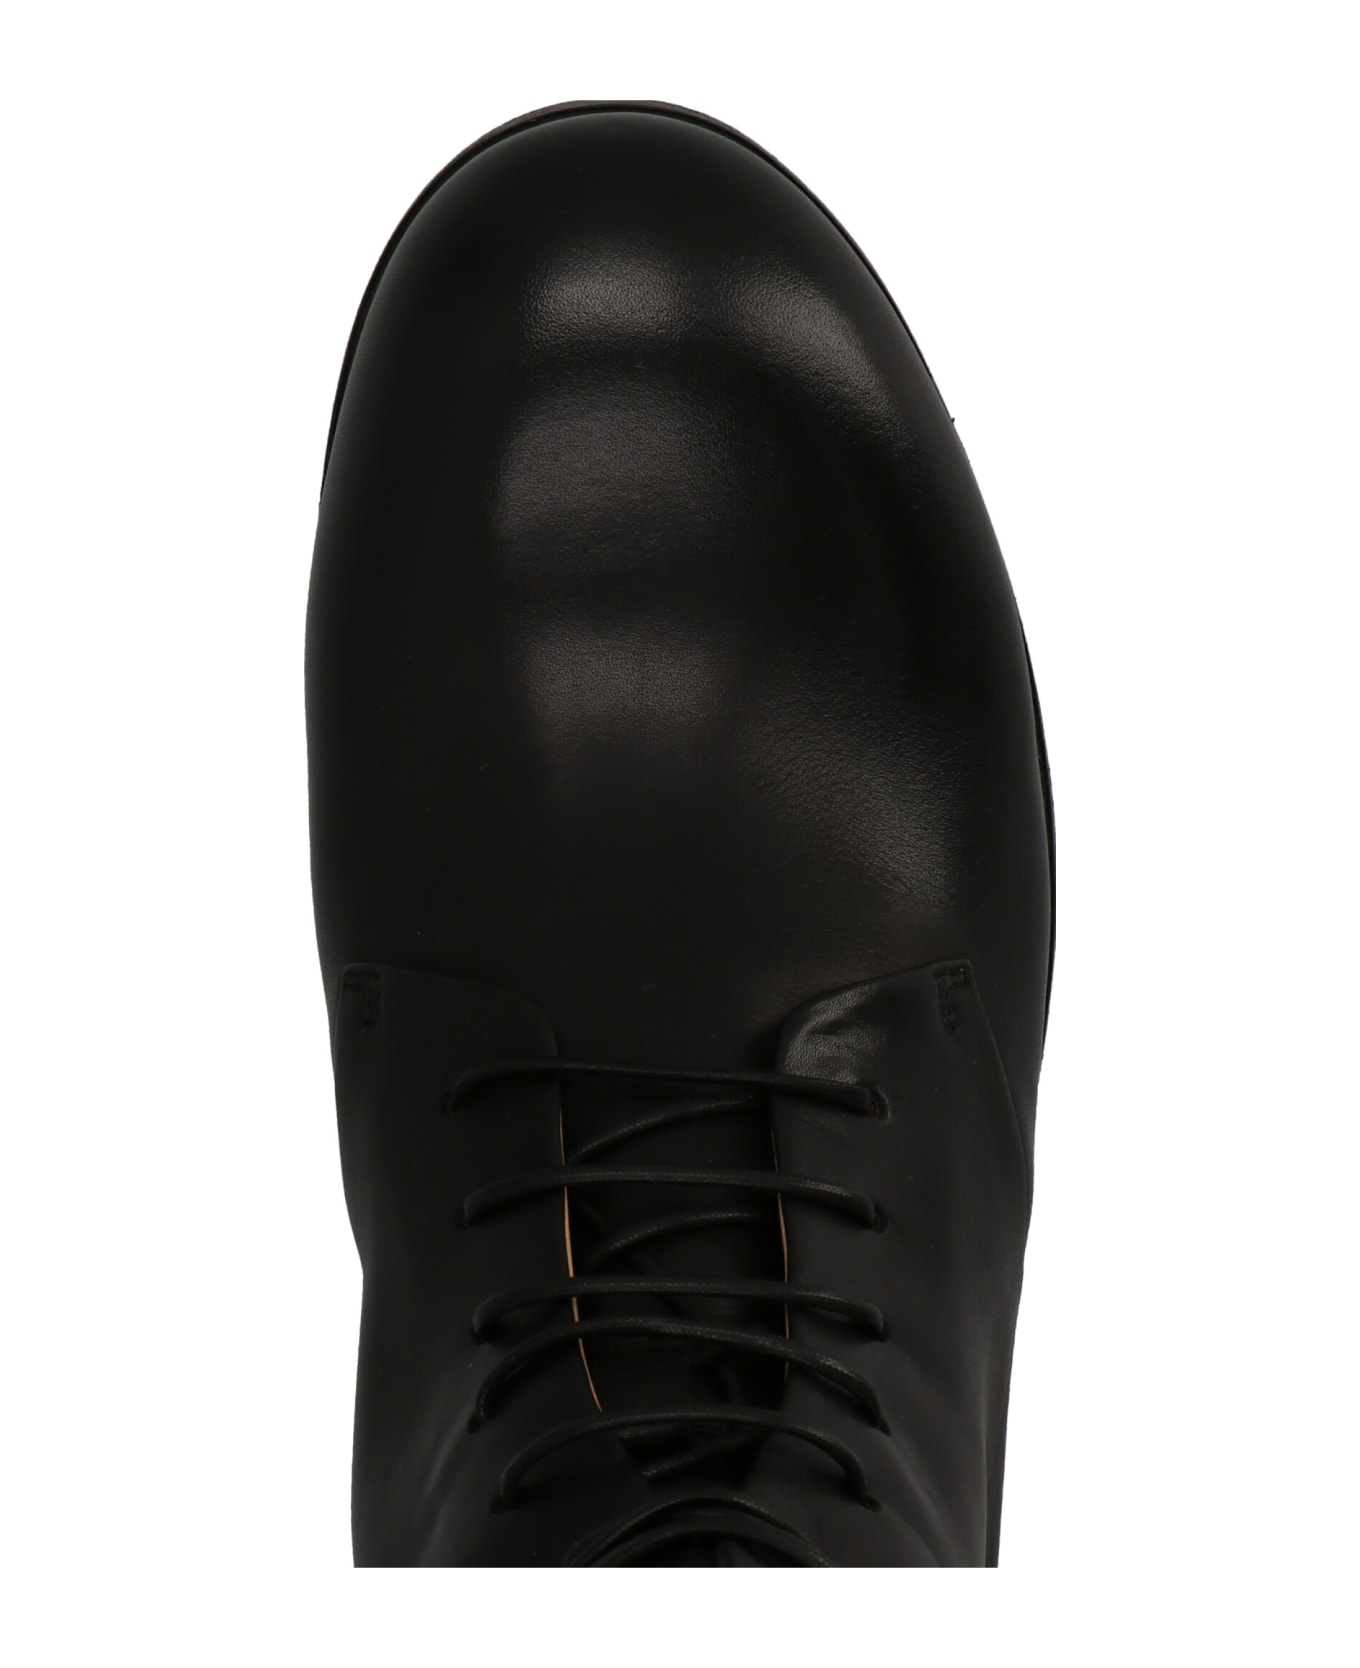 Marsell 'zucca Zeppa' Ankle Boots - Black  